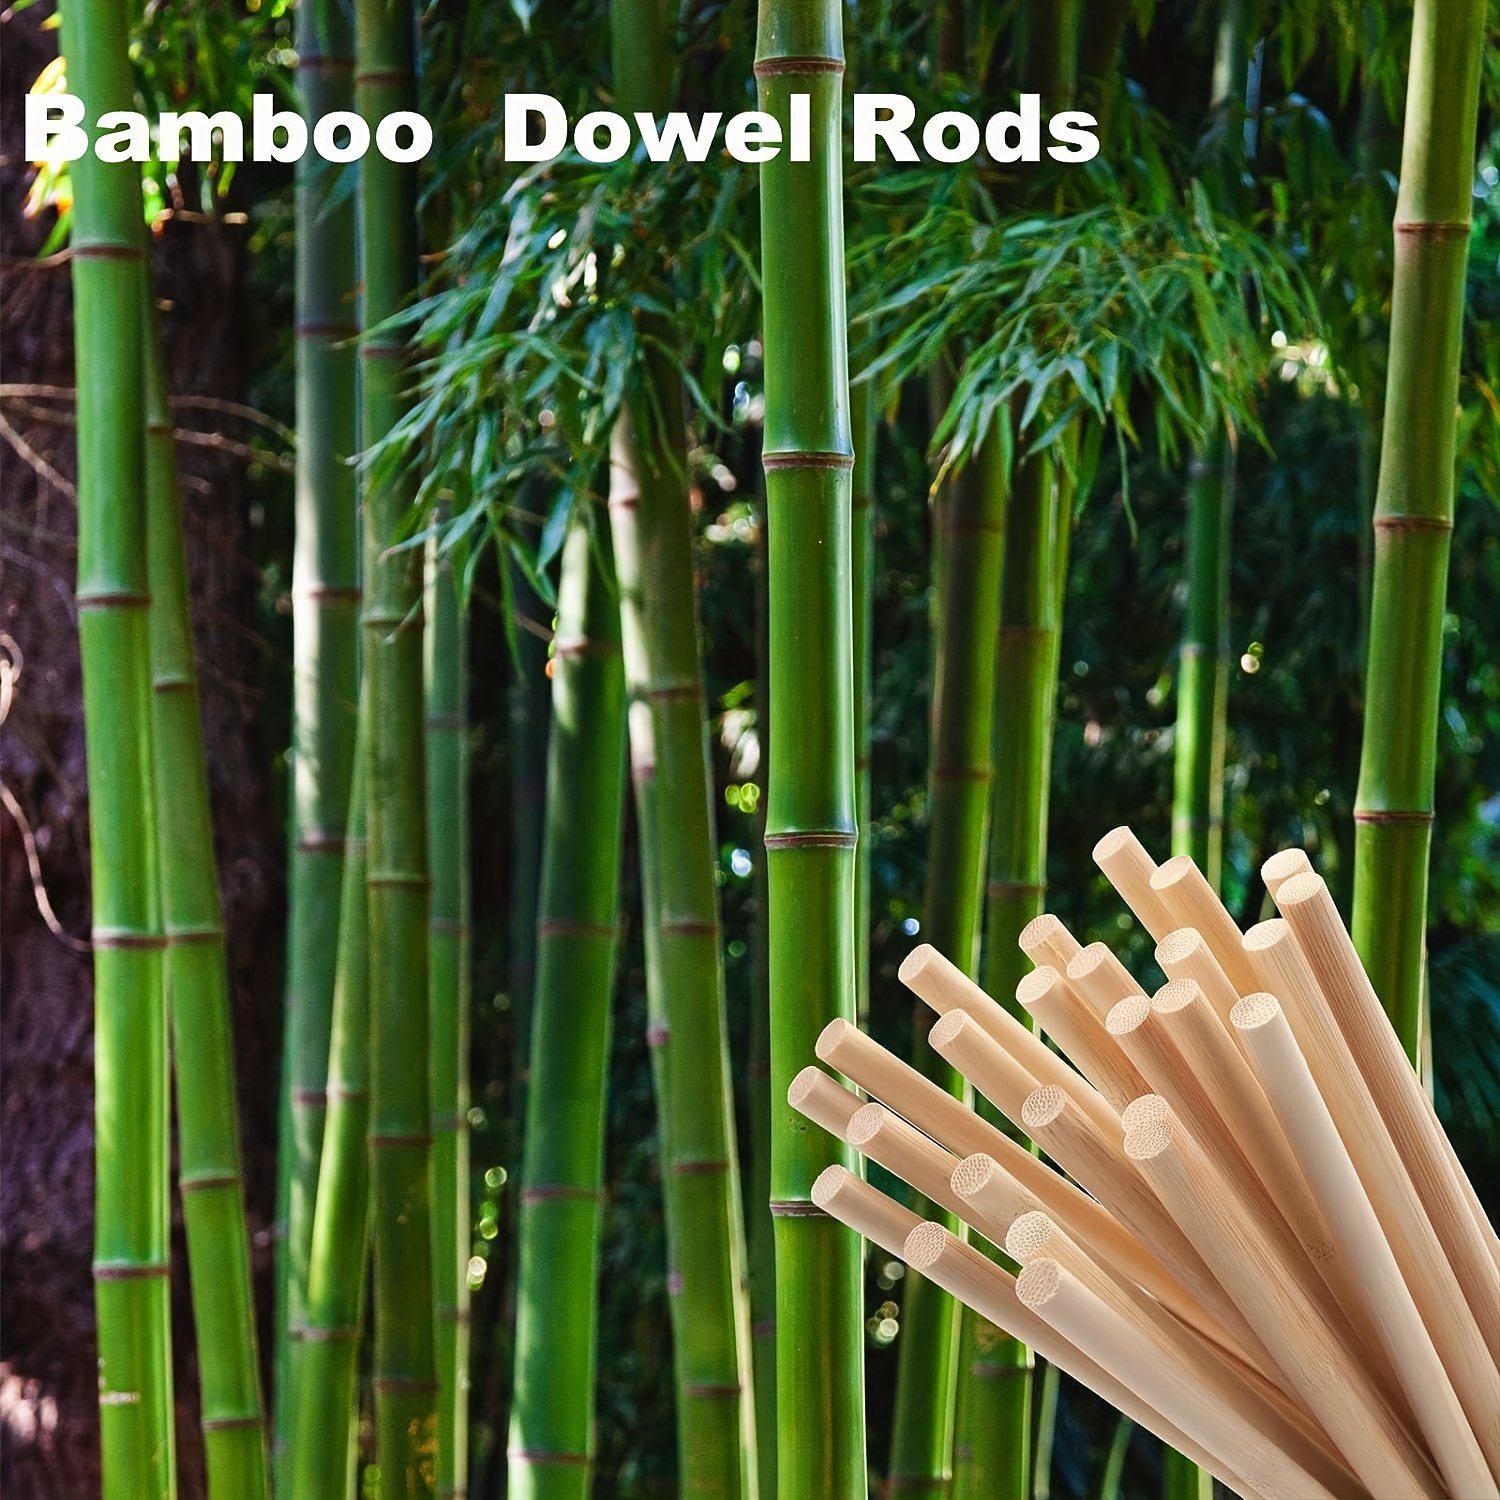 Asian Hobby Crafts Bamboo Sticks, Pack of 100, Unfinished Bamboo Sticks,  Wooden Bamboo Sticks for Multi Purpose, Skewers, Hobby Crafts, DIY  Activities 9 Inches : : Home & Kitchen